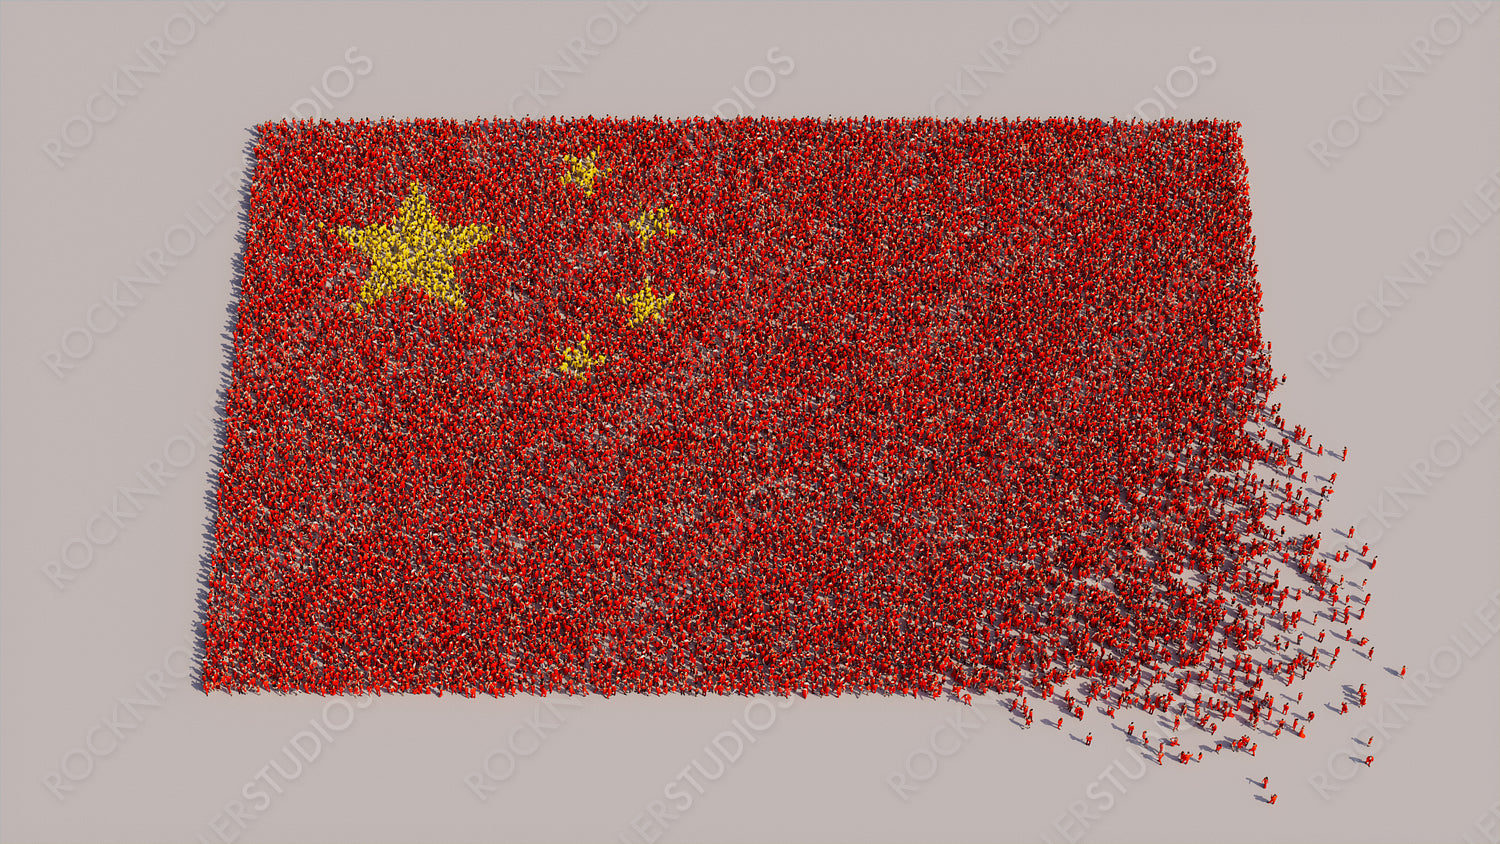 A Crowd of People coming together to form the Flag of China. Chinese Banner on White.